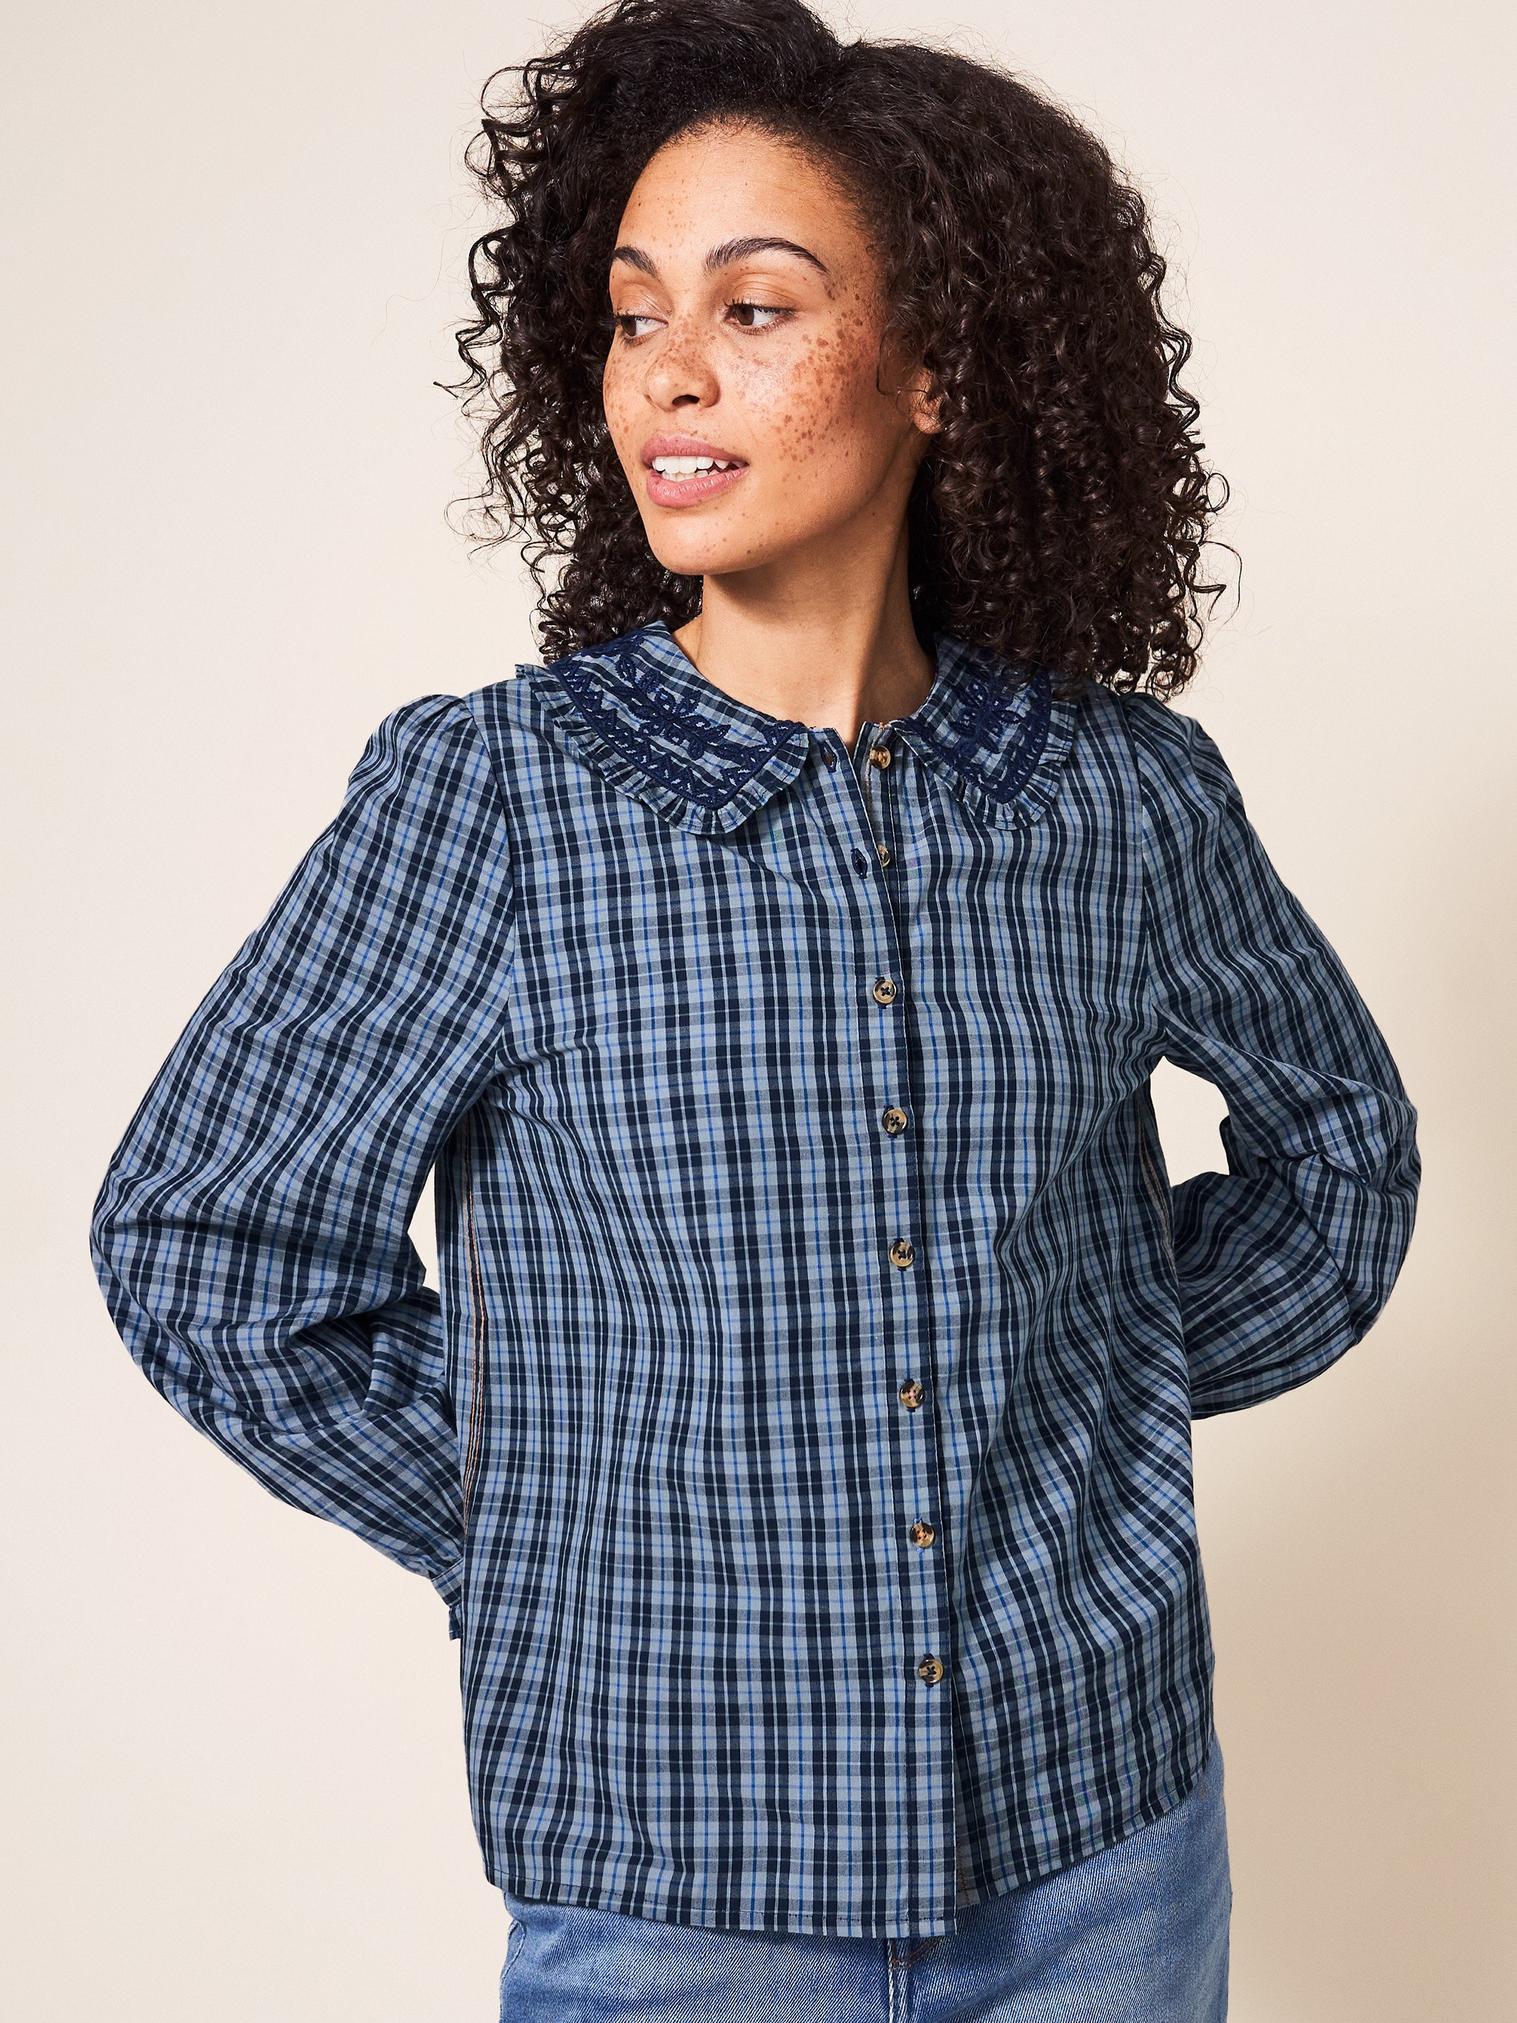 Darcy Embroidered Check Shirt in NAVY MULTI - LIFESTYLE